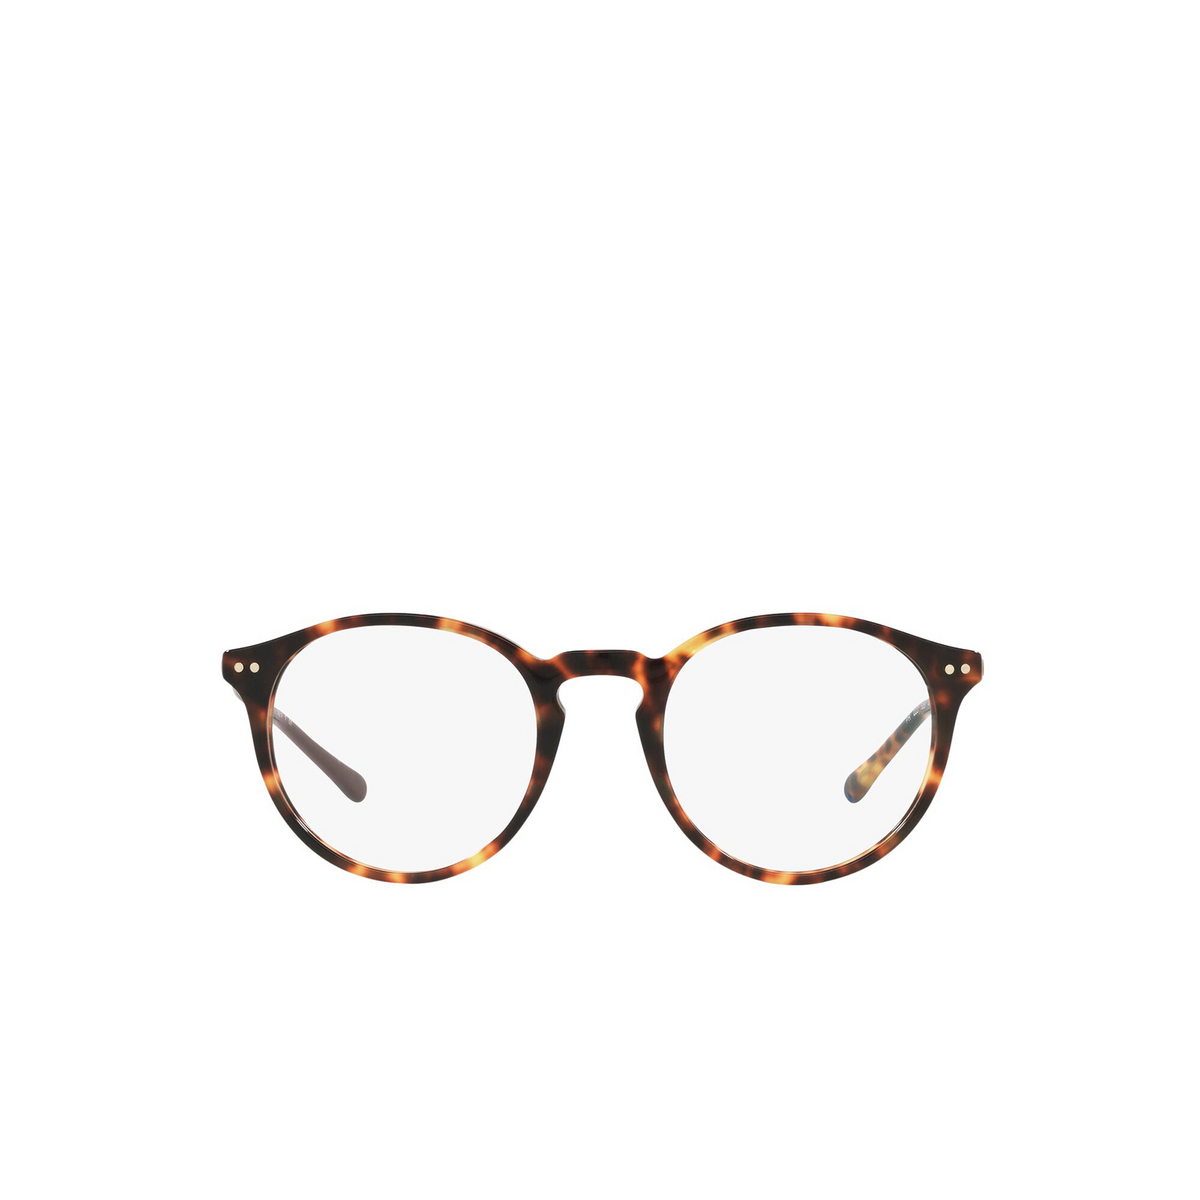 Polo Ralph Lauren® Round Eyeglasses: PH2227 color Shiny New Jerry Tortoise 5351 - front view.